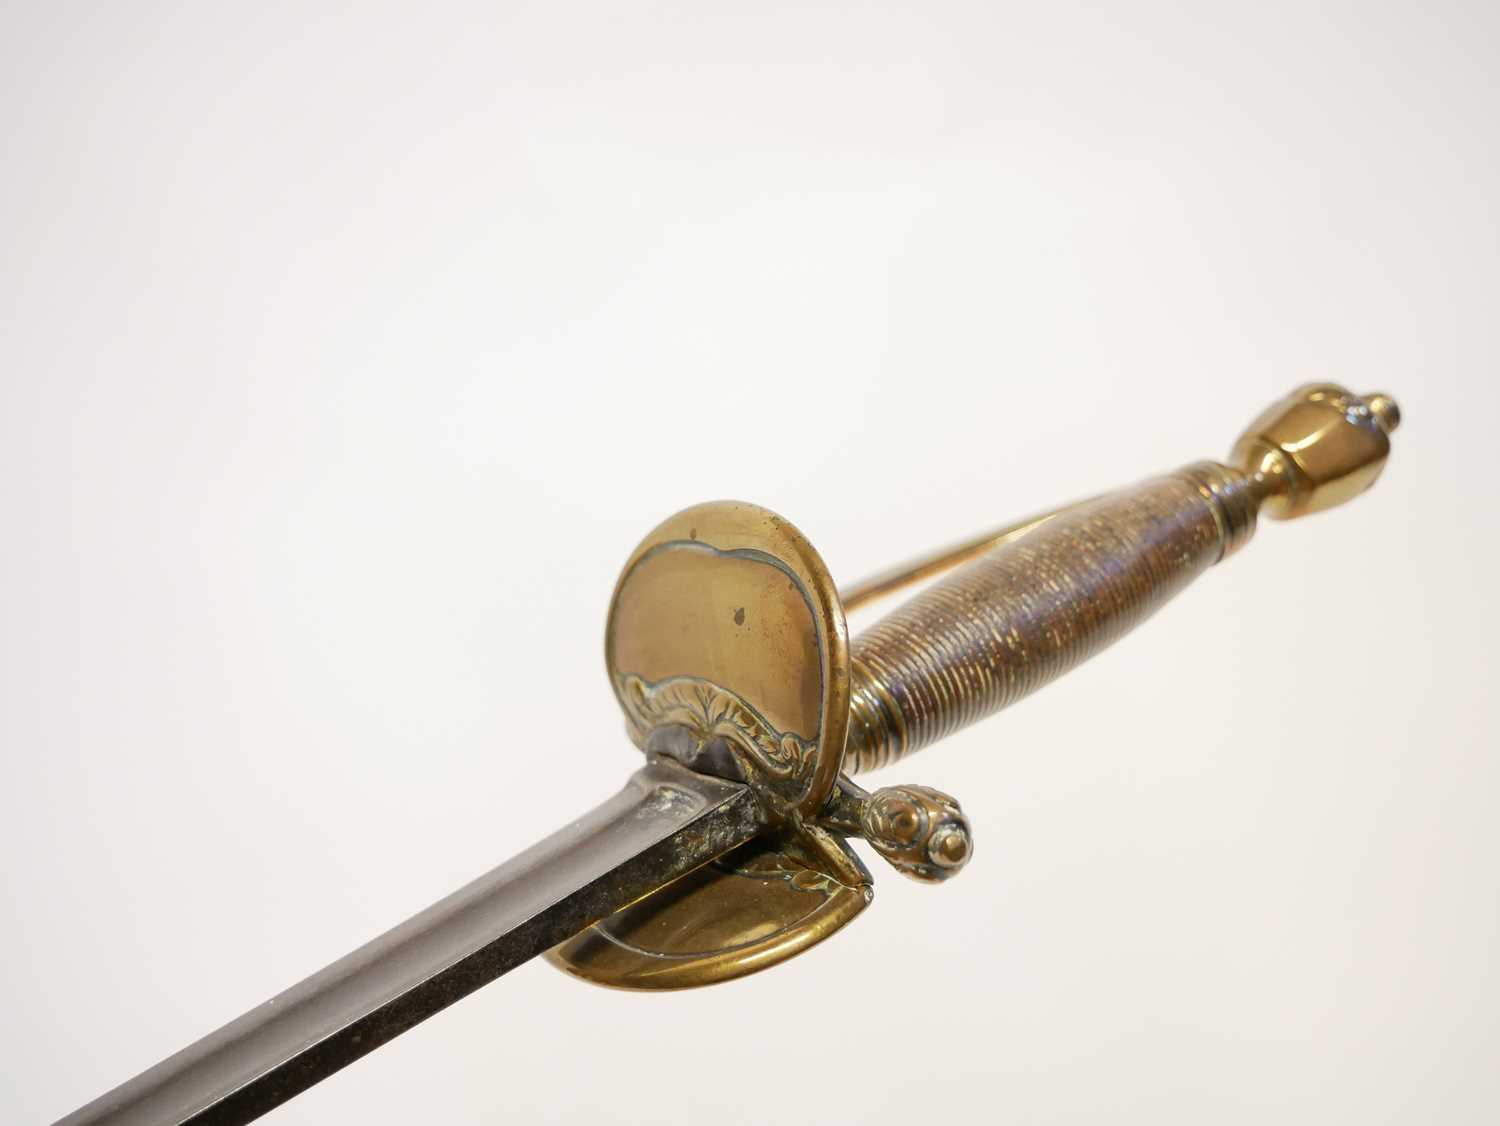 1796 pattern infantry officers sword, 32inch fullered blade, wire bound grip and folding guard. - Image 4 of 5